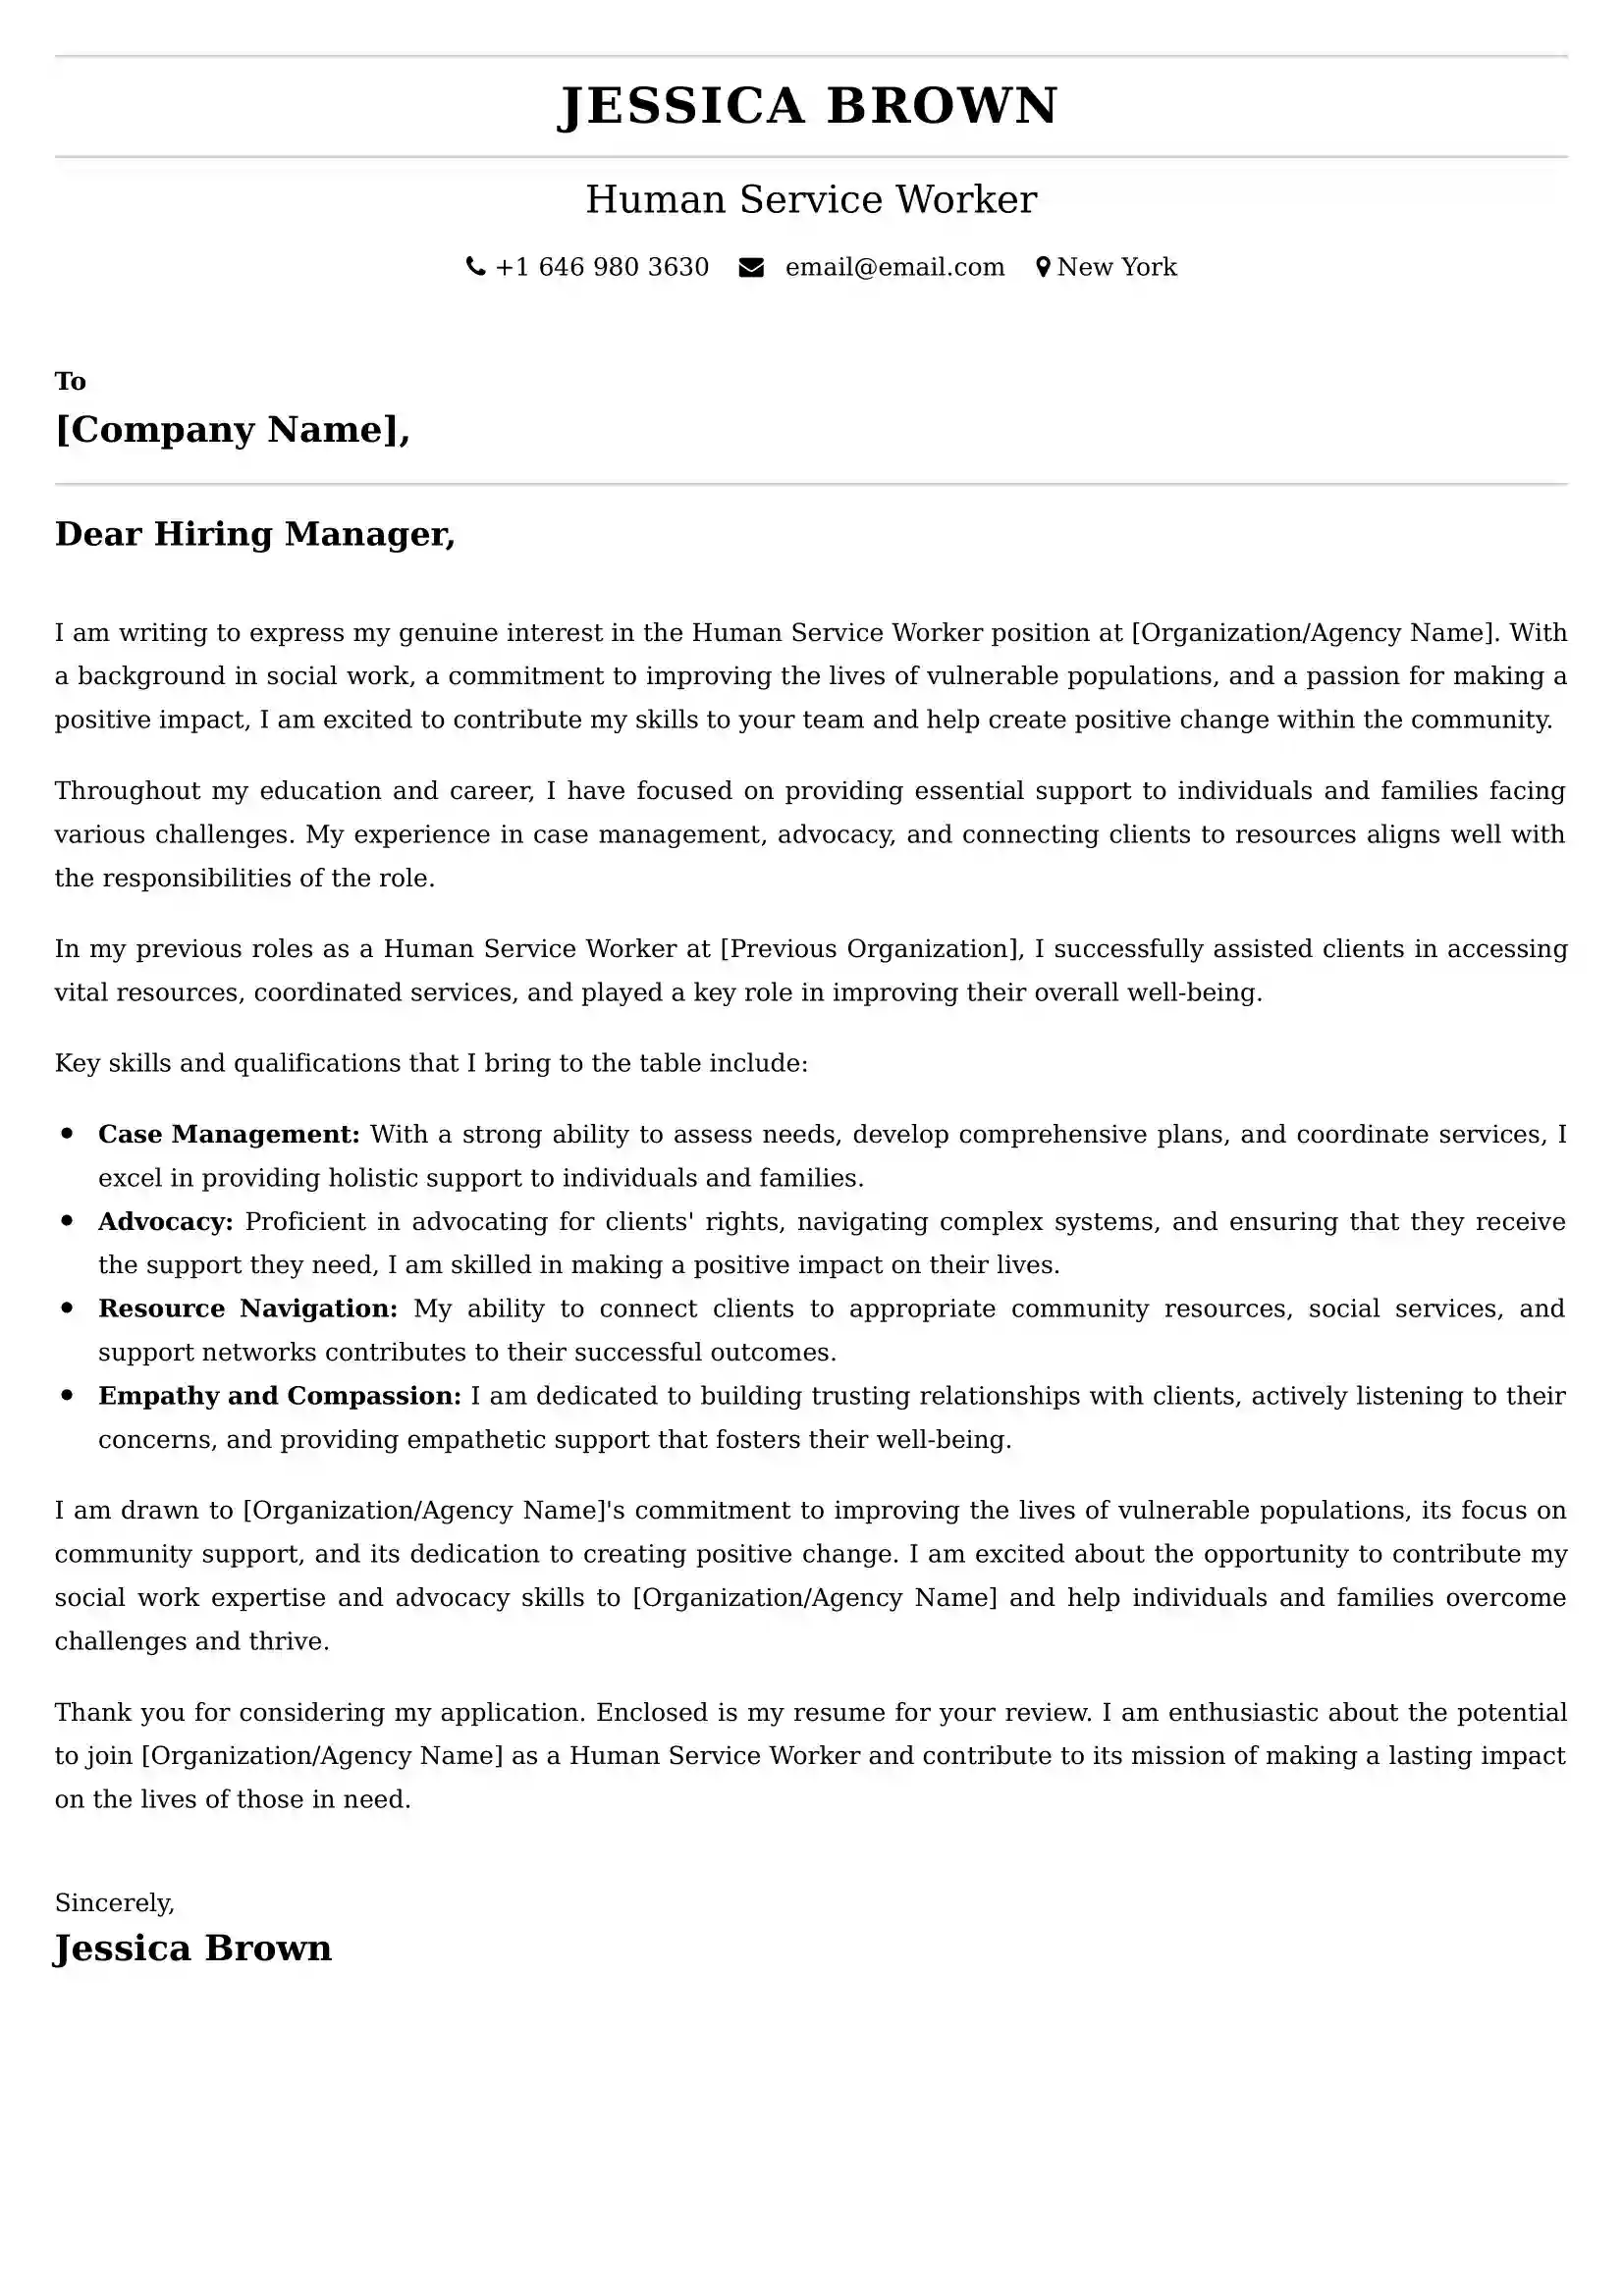 Human Service Worker Cover Letter Examples for UK 